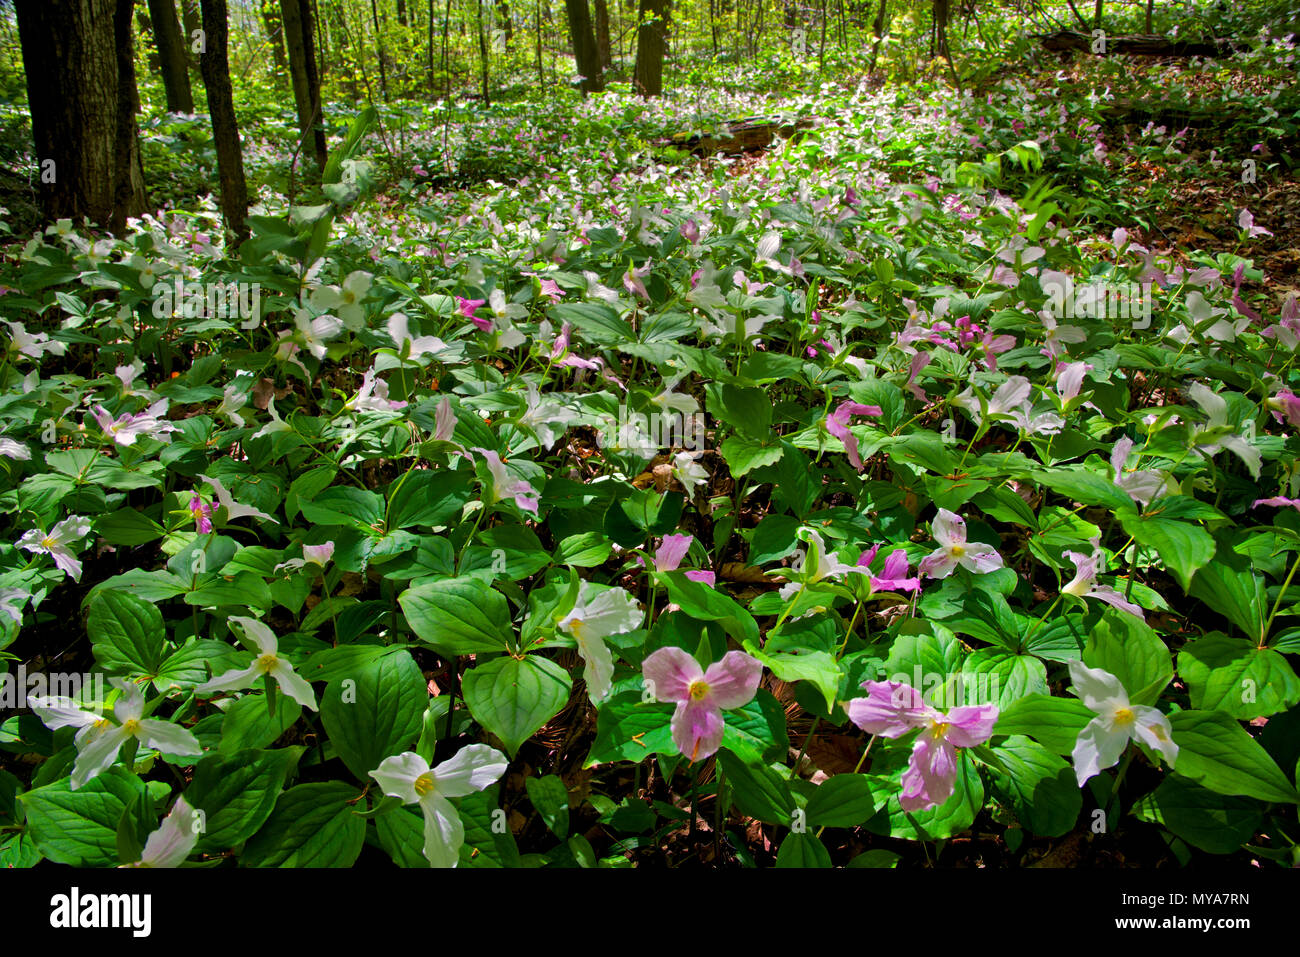 A field of red trilliums emerging from the woodland floor in early Spring Stock Photo